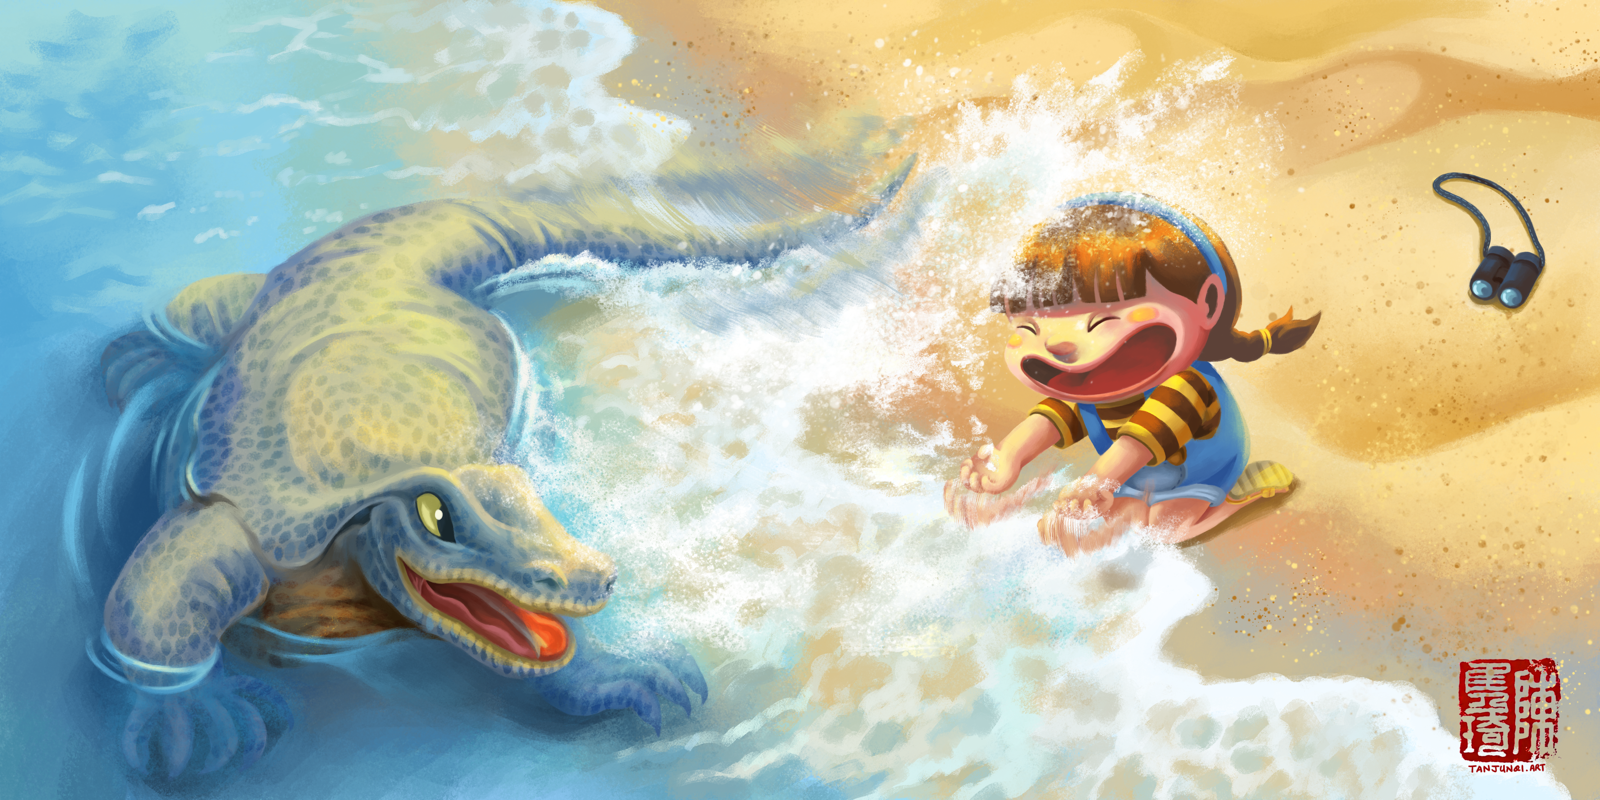 A two-page spread from 'Shan Shan and Ms. Water Monitor', showing Shan Shan and Ms. Water Monitor playing with water at the beach. Shan Shan is splashing water at Ms. Water Monitor with her hands, while Ms. Water Monitor is splashing water at her with her tail